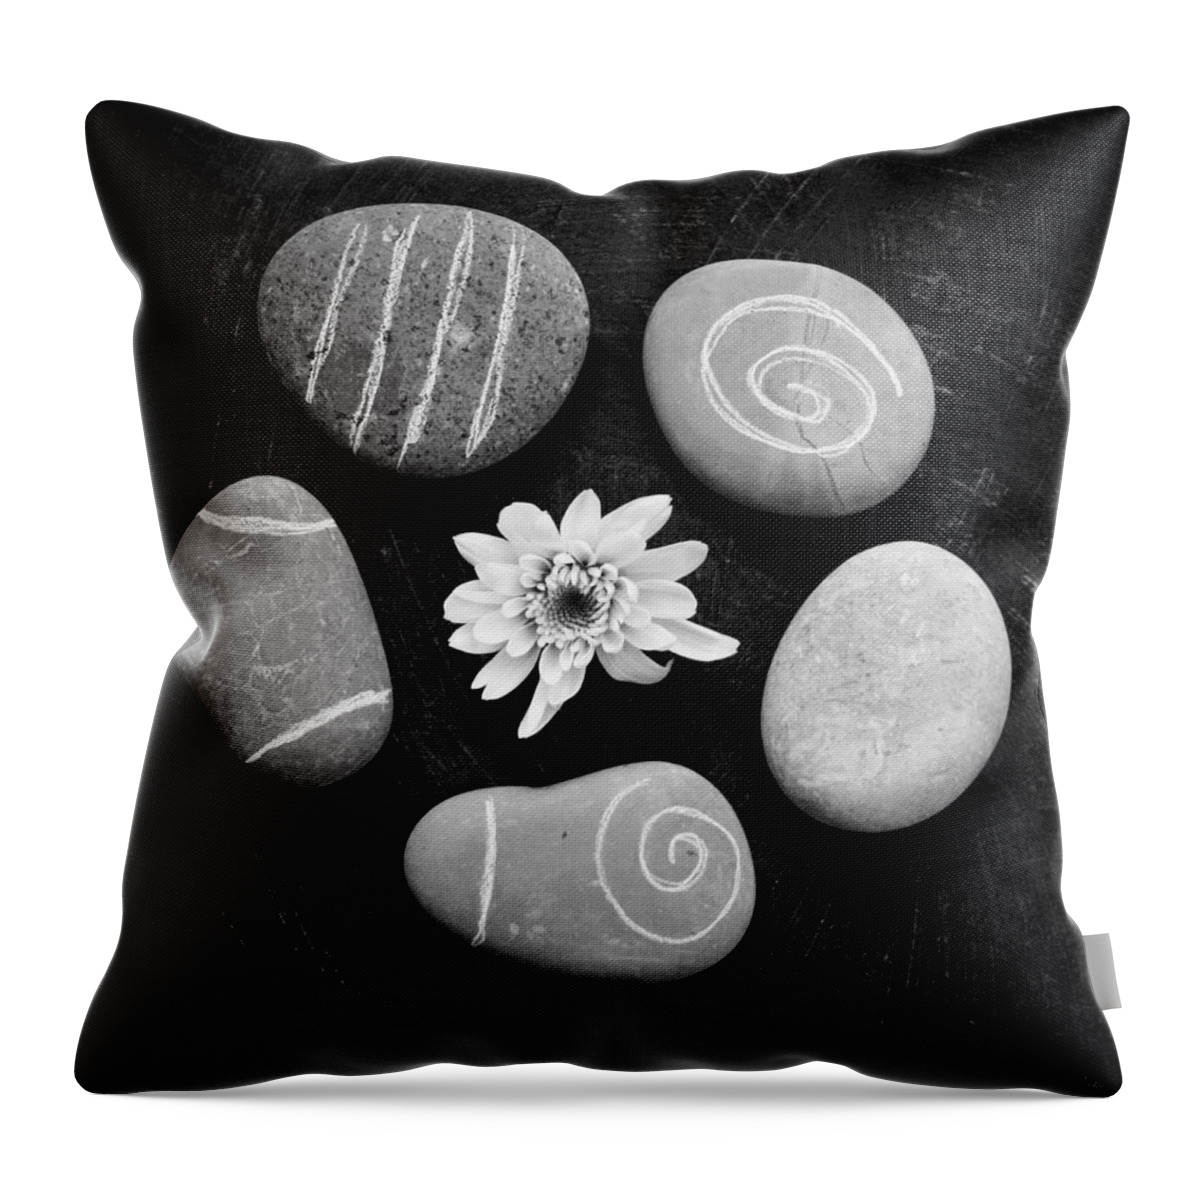 Zen Throw Pillow featuring the photograph Enlightened - Art by Linda Woods by Linda Woods